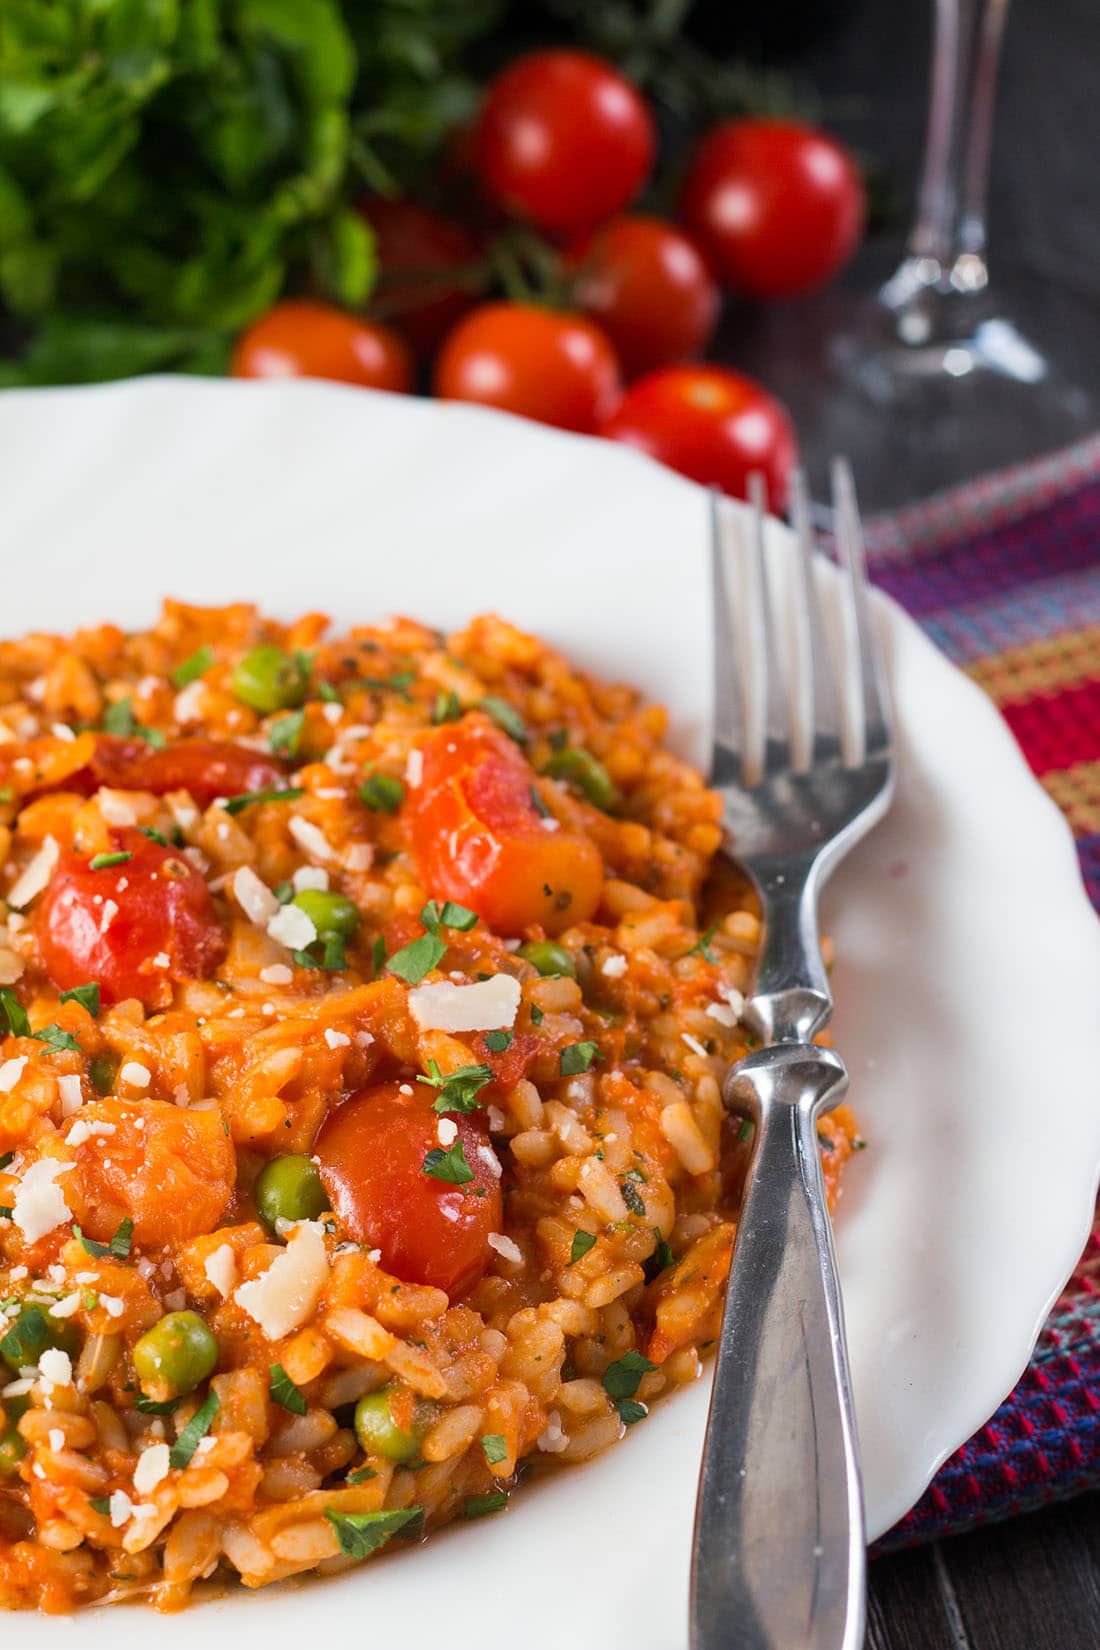 Roast Tomato and Pea Risotto - So easy and full of flavor!